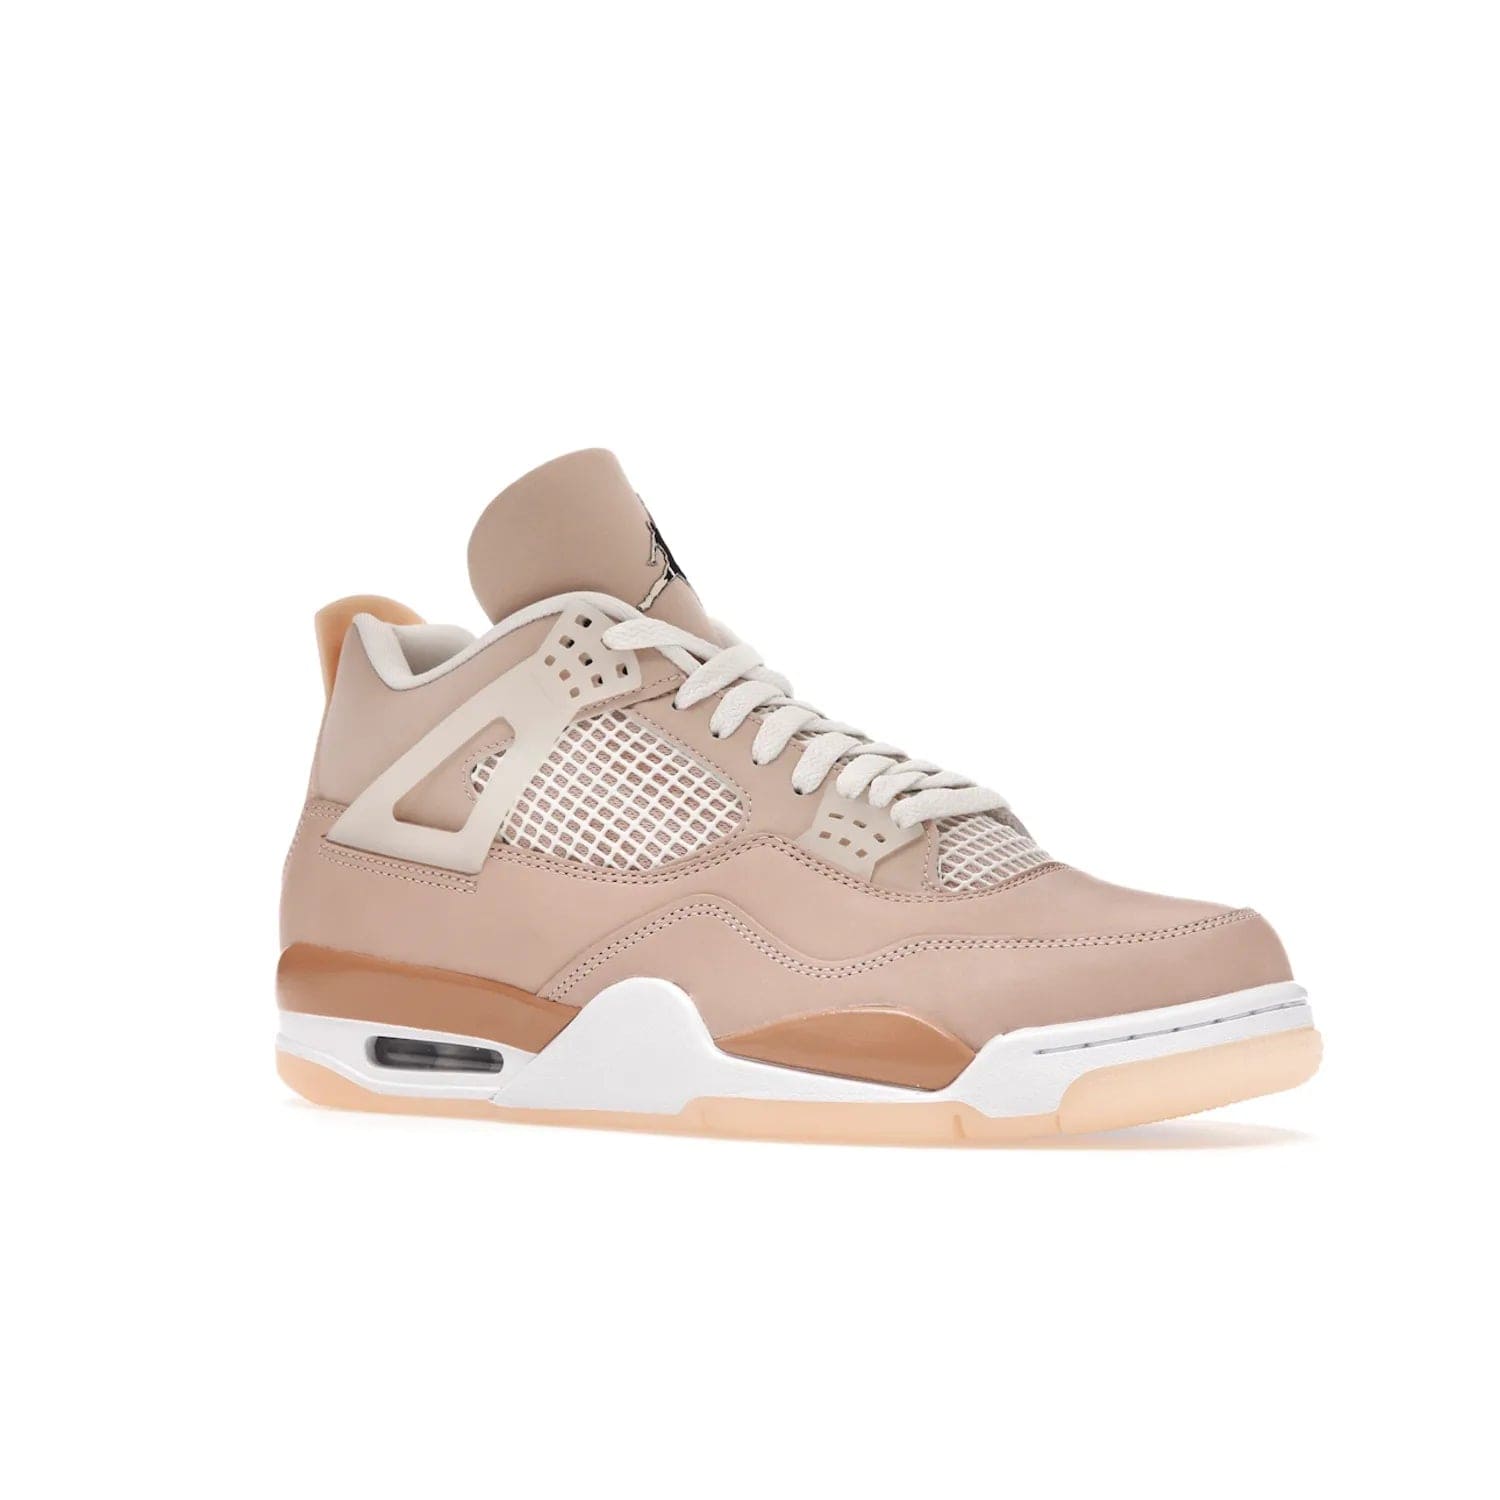 Jordan 4 Retro Shimmer (Women's) - Image 4 - Only at www.BallersClubKickz.com - Air Jordan 4 Shimmer (W): A women's-exclusive design with a buttery beige upper and Silver/Orange Bronze details. Durabuck and metallic Jumpman branding elevate the iconic silhouette. Shop now.